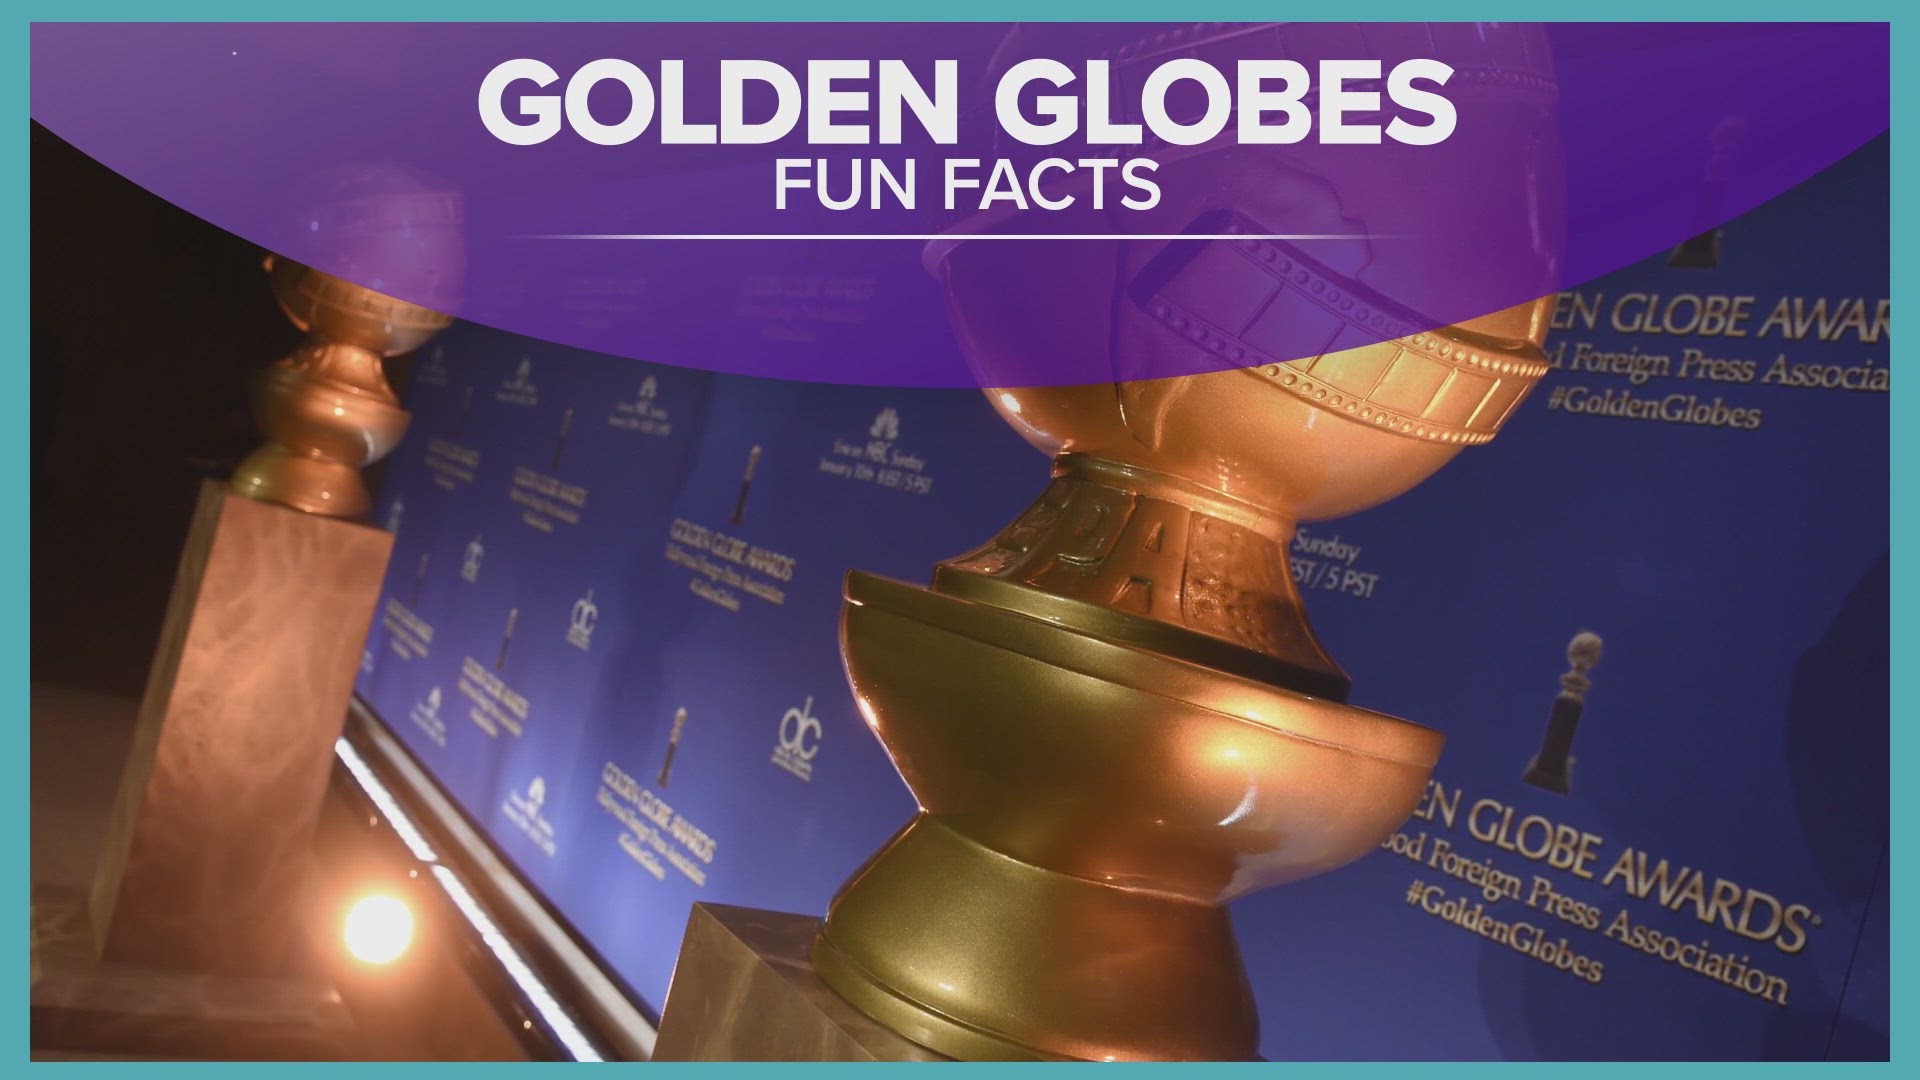 Did you know these facts about the Golden Globes?